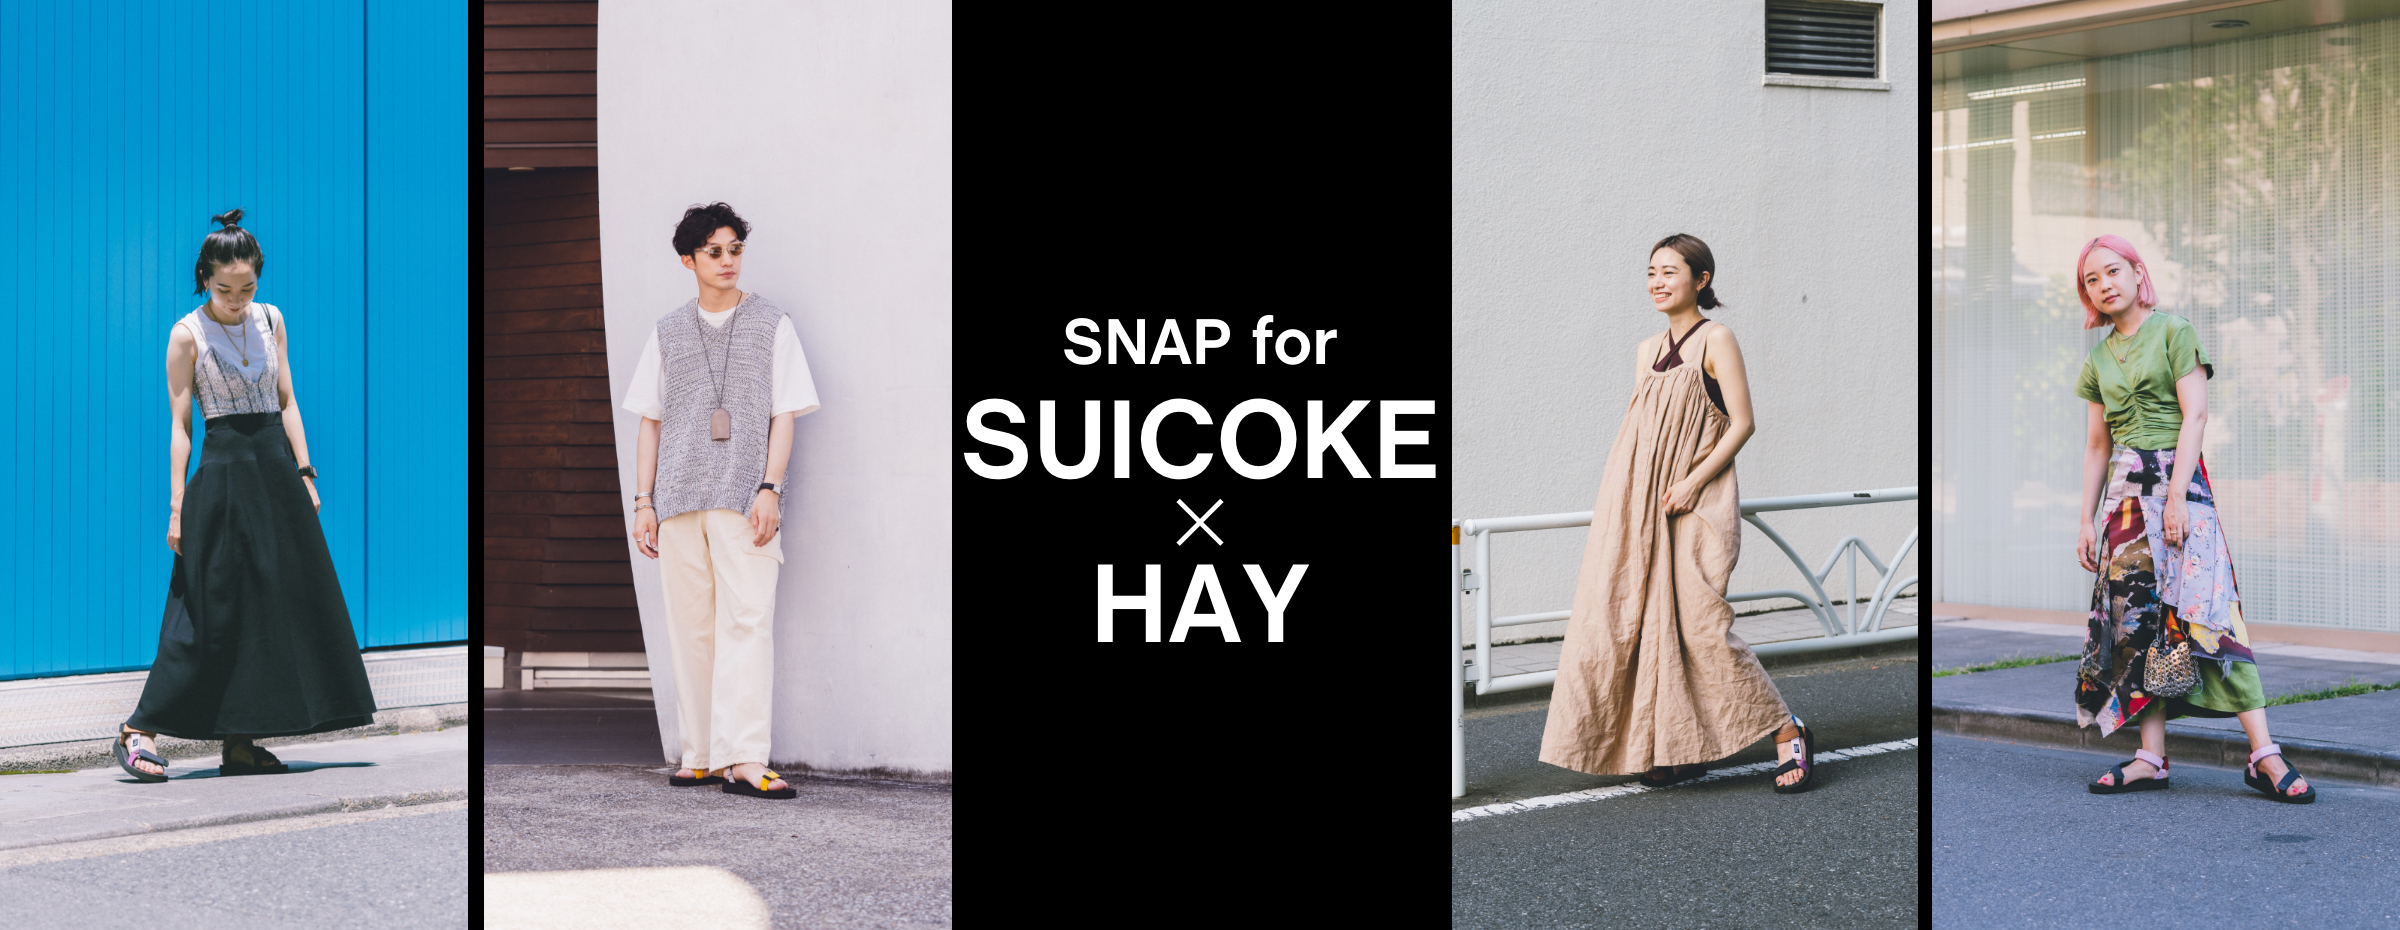 SNAP for SUICOKE × HAY